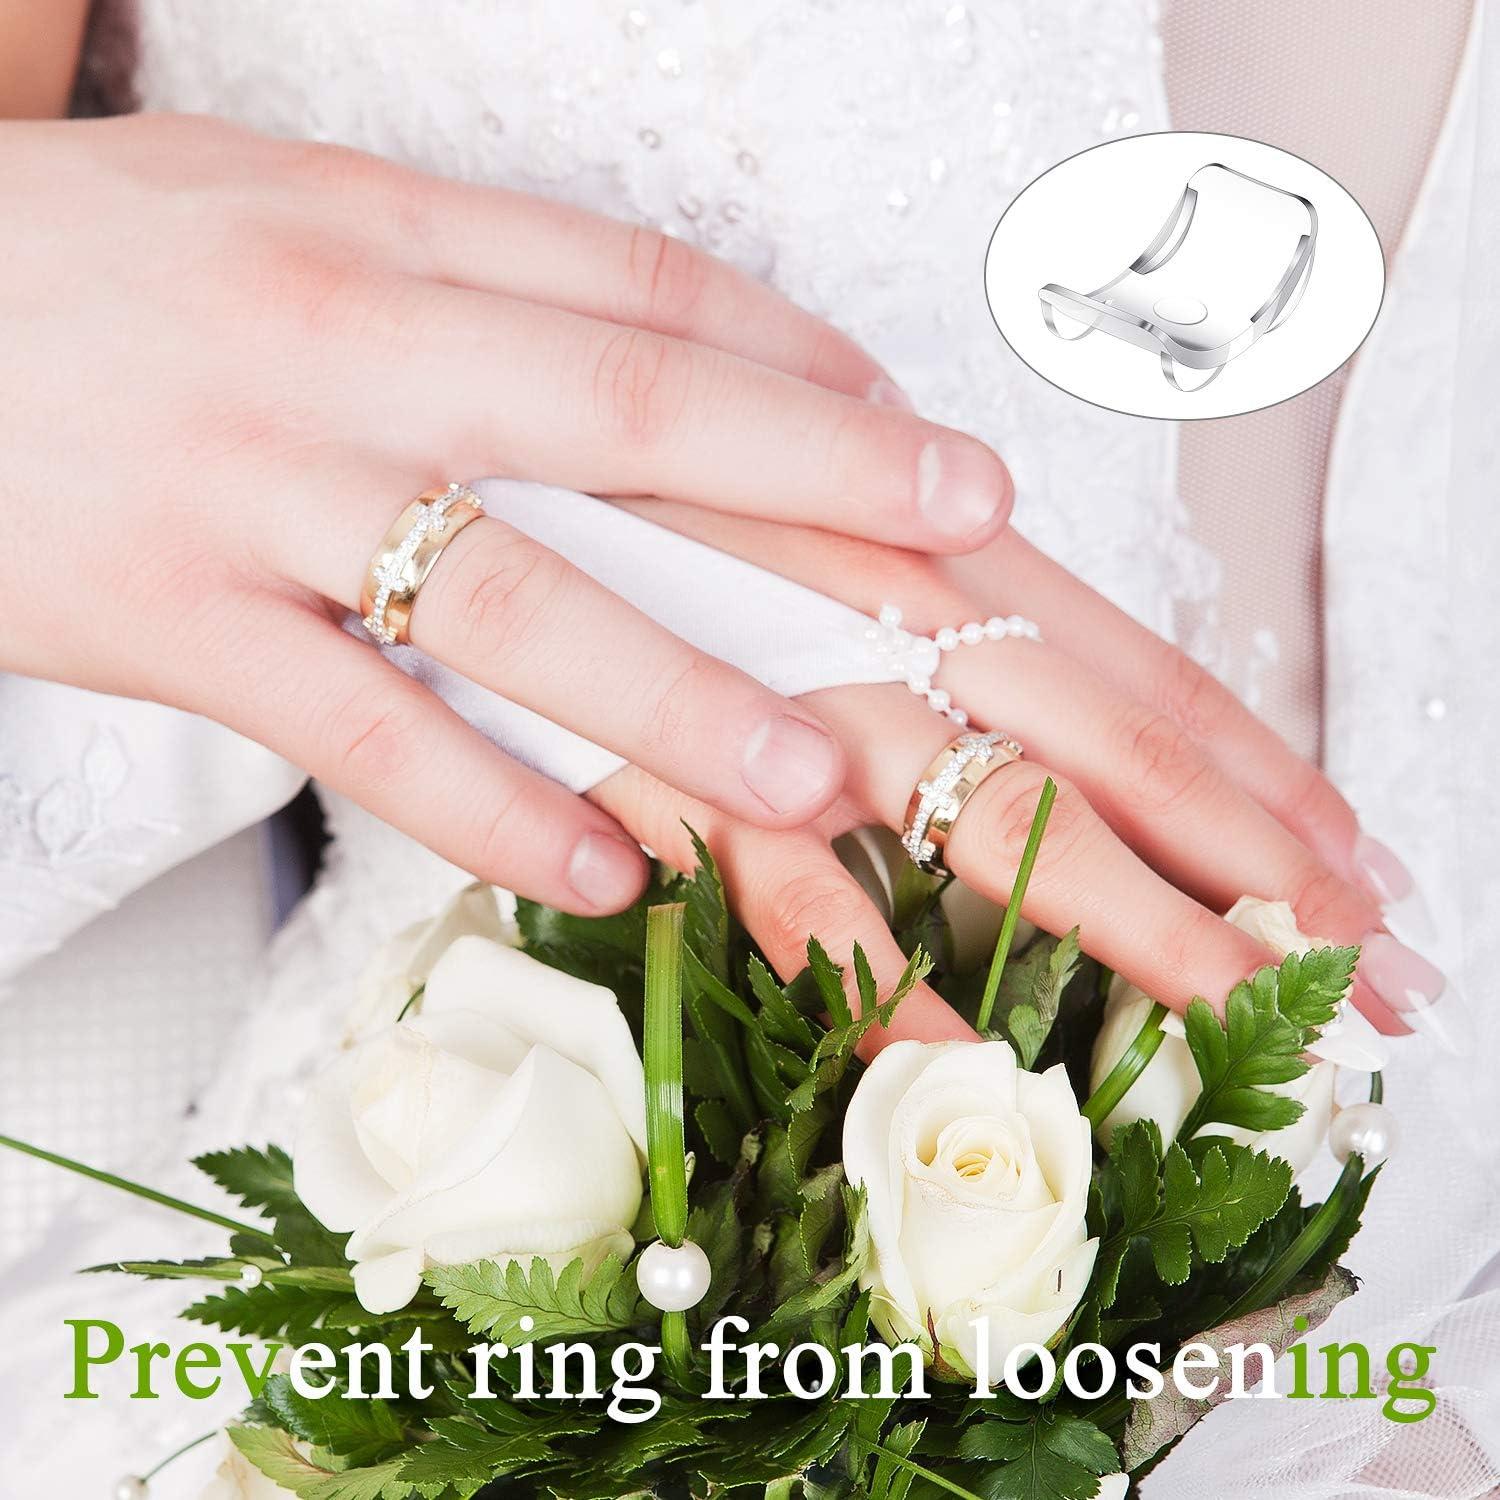 8 PCS Ring Size Adjuster for Loose Rings, Invisible Ring Size